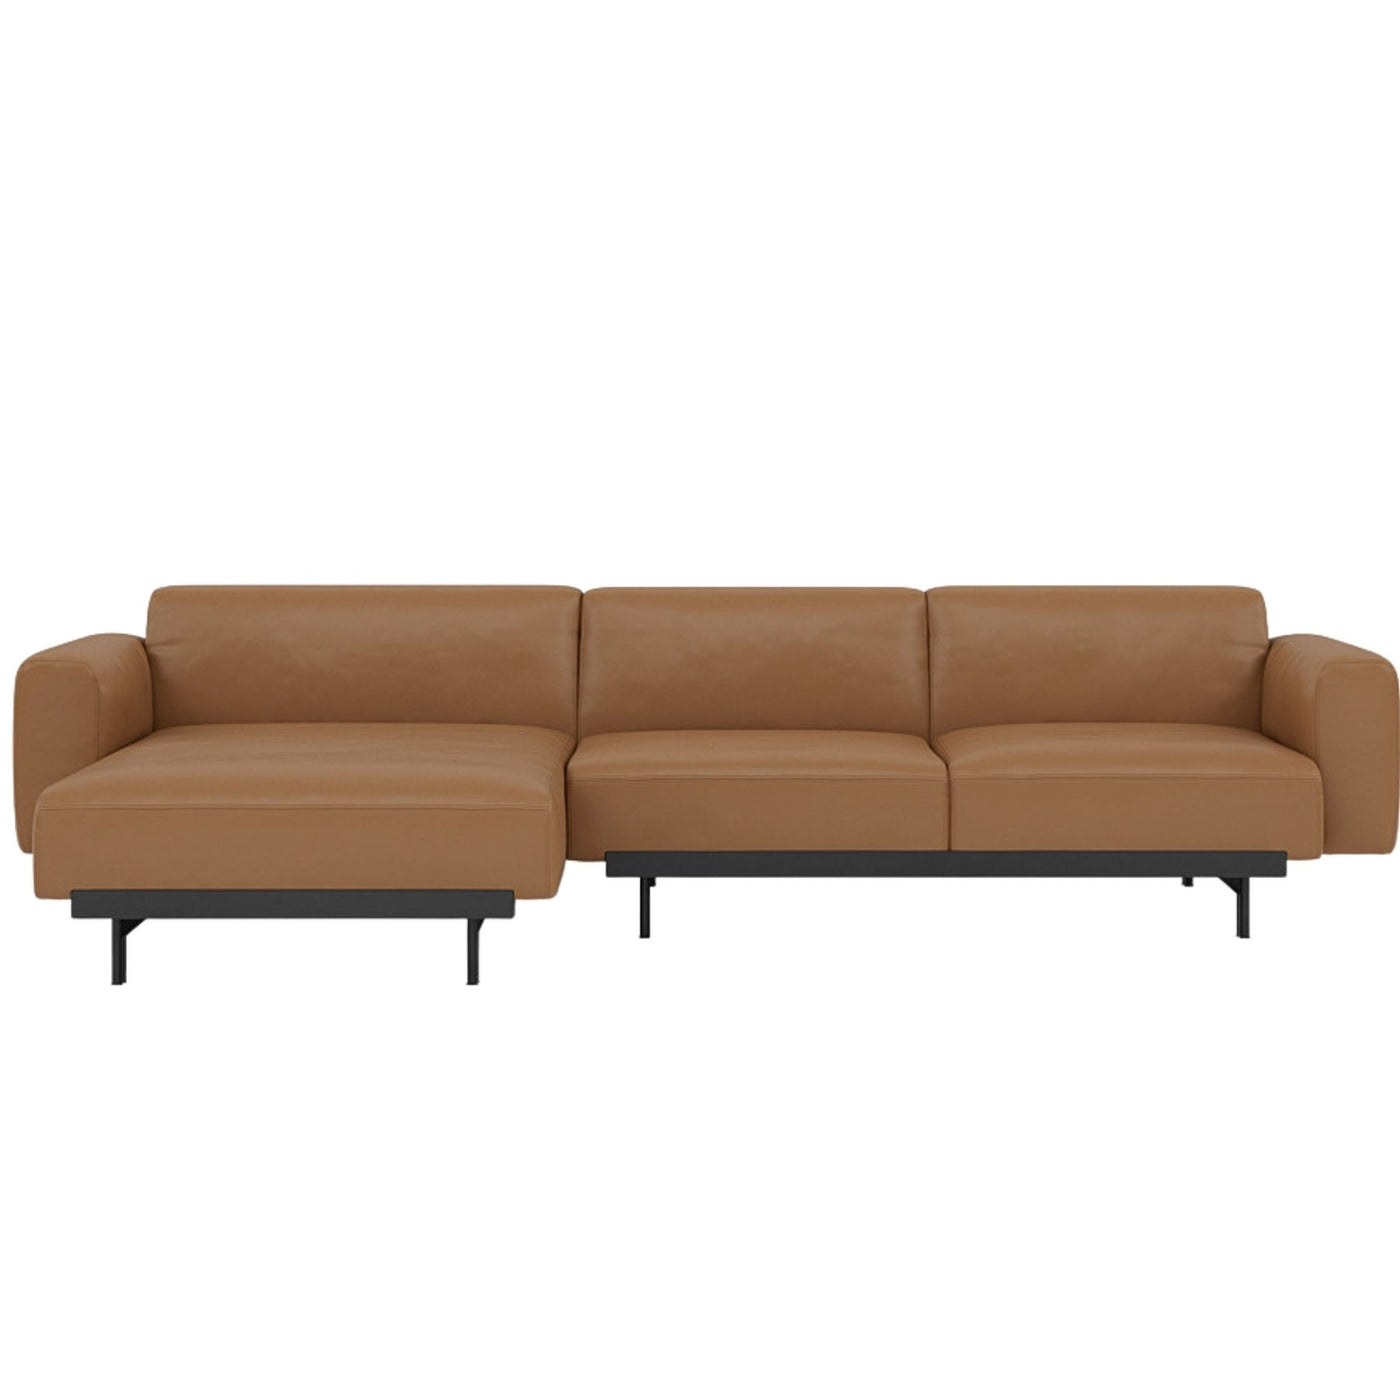 Muuto In Situ Modular 3 Seater Sofa, configuration 7. Made to order from someday designs. #colour_cognac-refine-leather